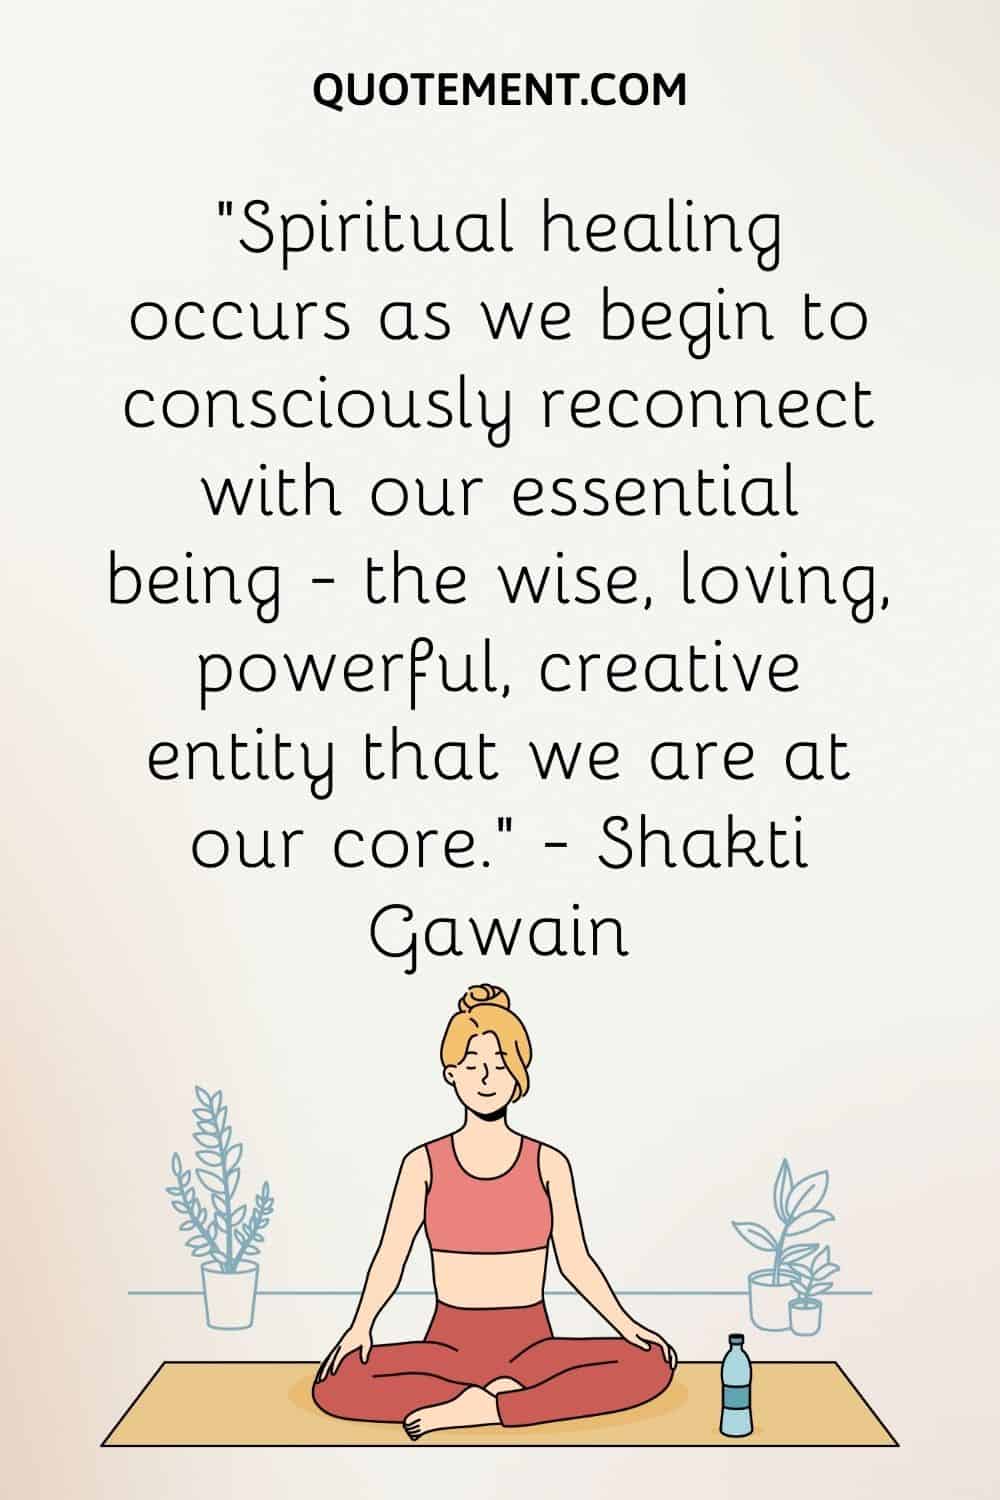 Spiritual healing occurs as we begin to consciously reconnect with our essential being